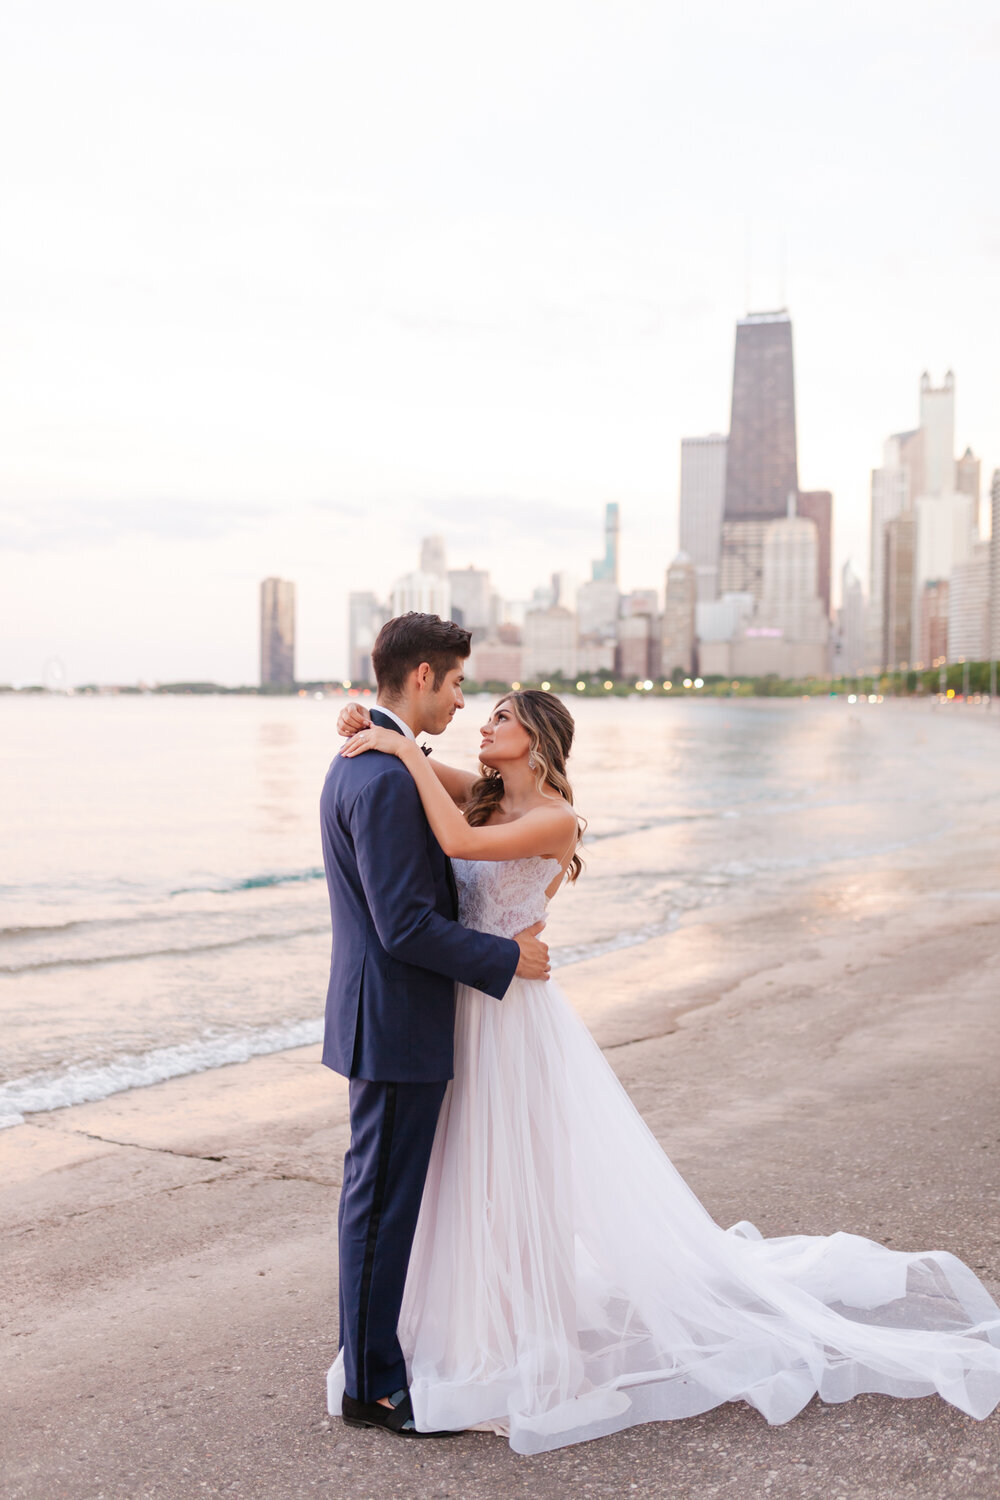 Beach+wedding+in+Chicago+wedding+photography+and+couples+posing+inspiration.jpg